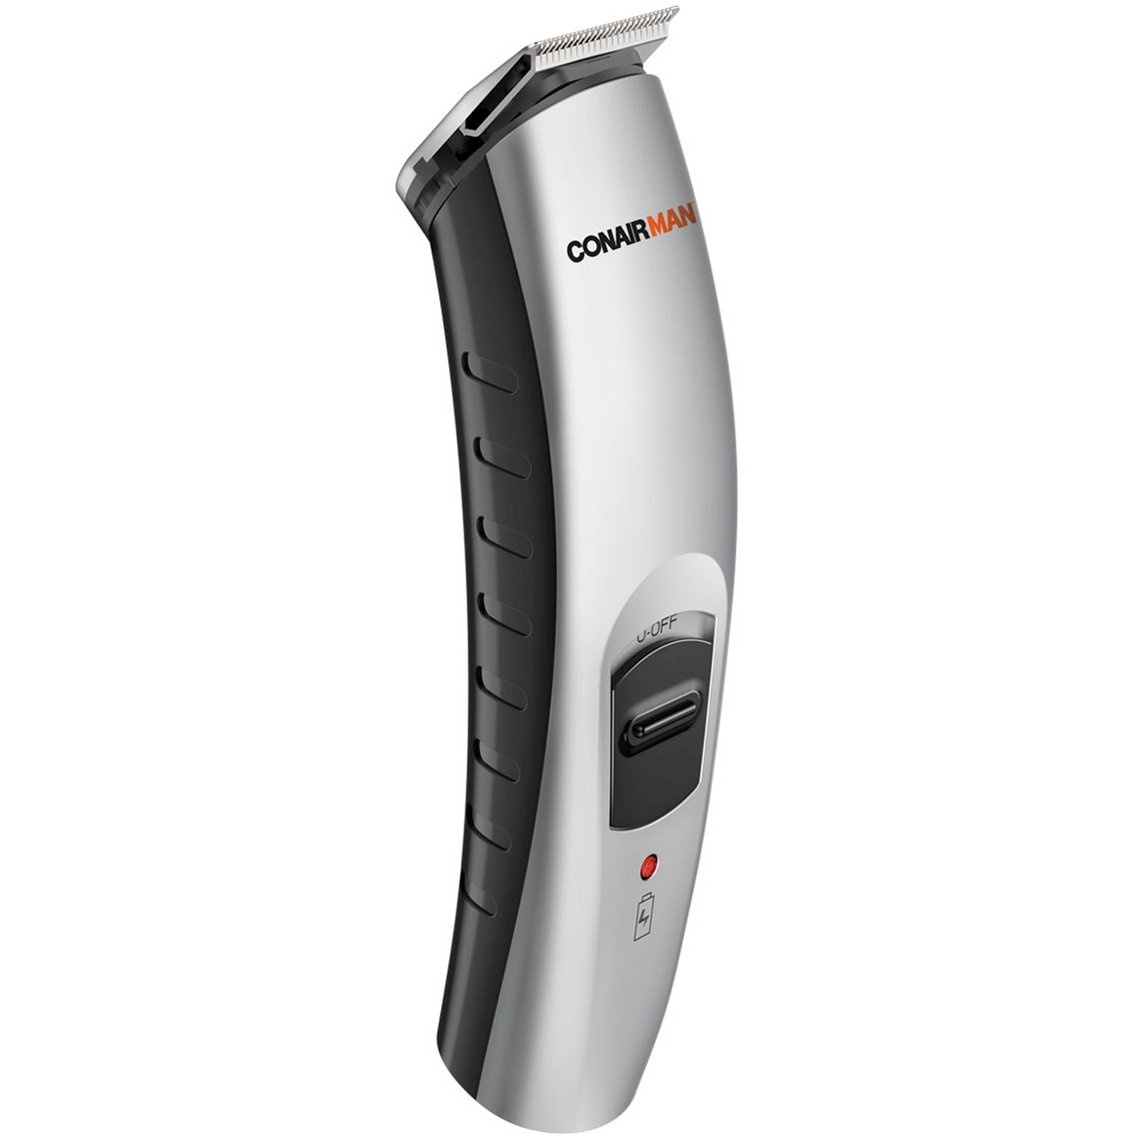 Conair Man  All In One 13 pc. Grooming System - Image 3 of 3